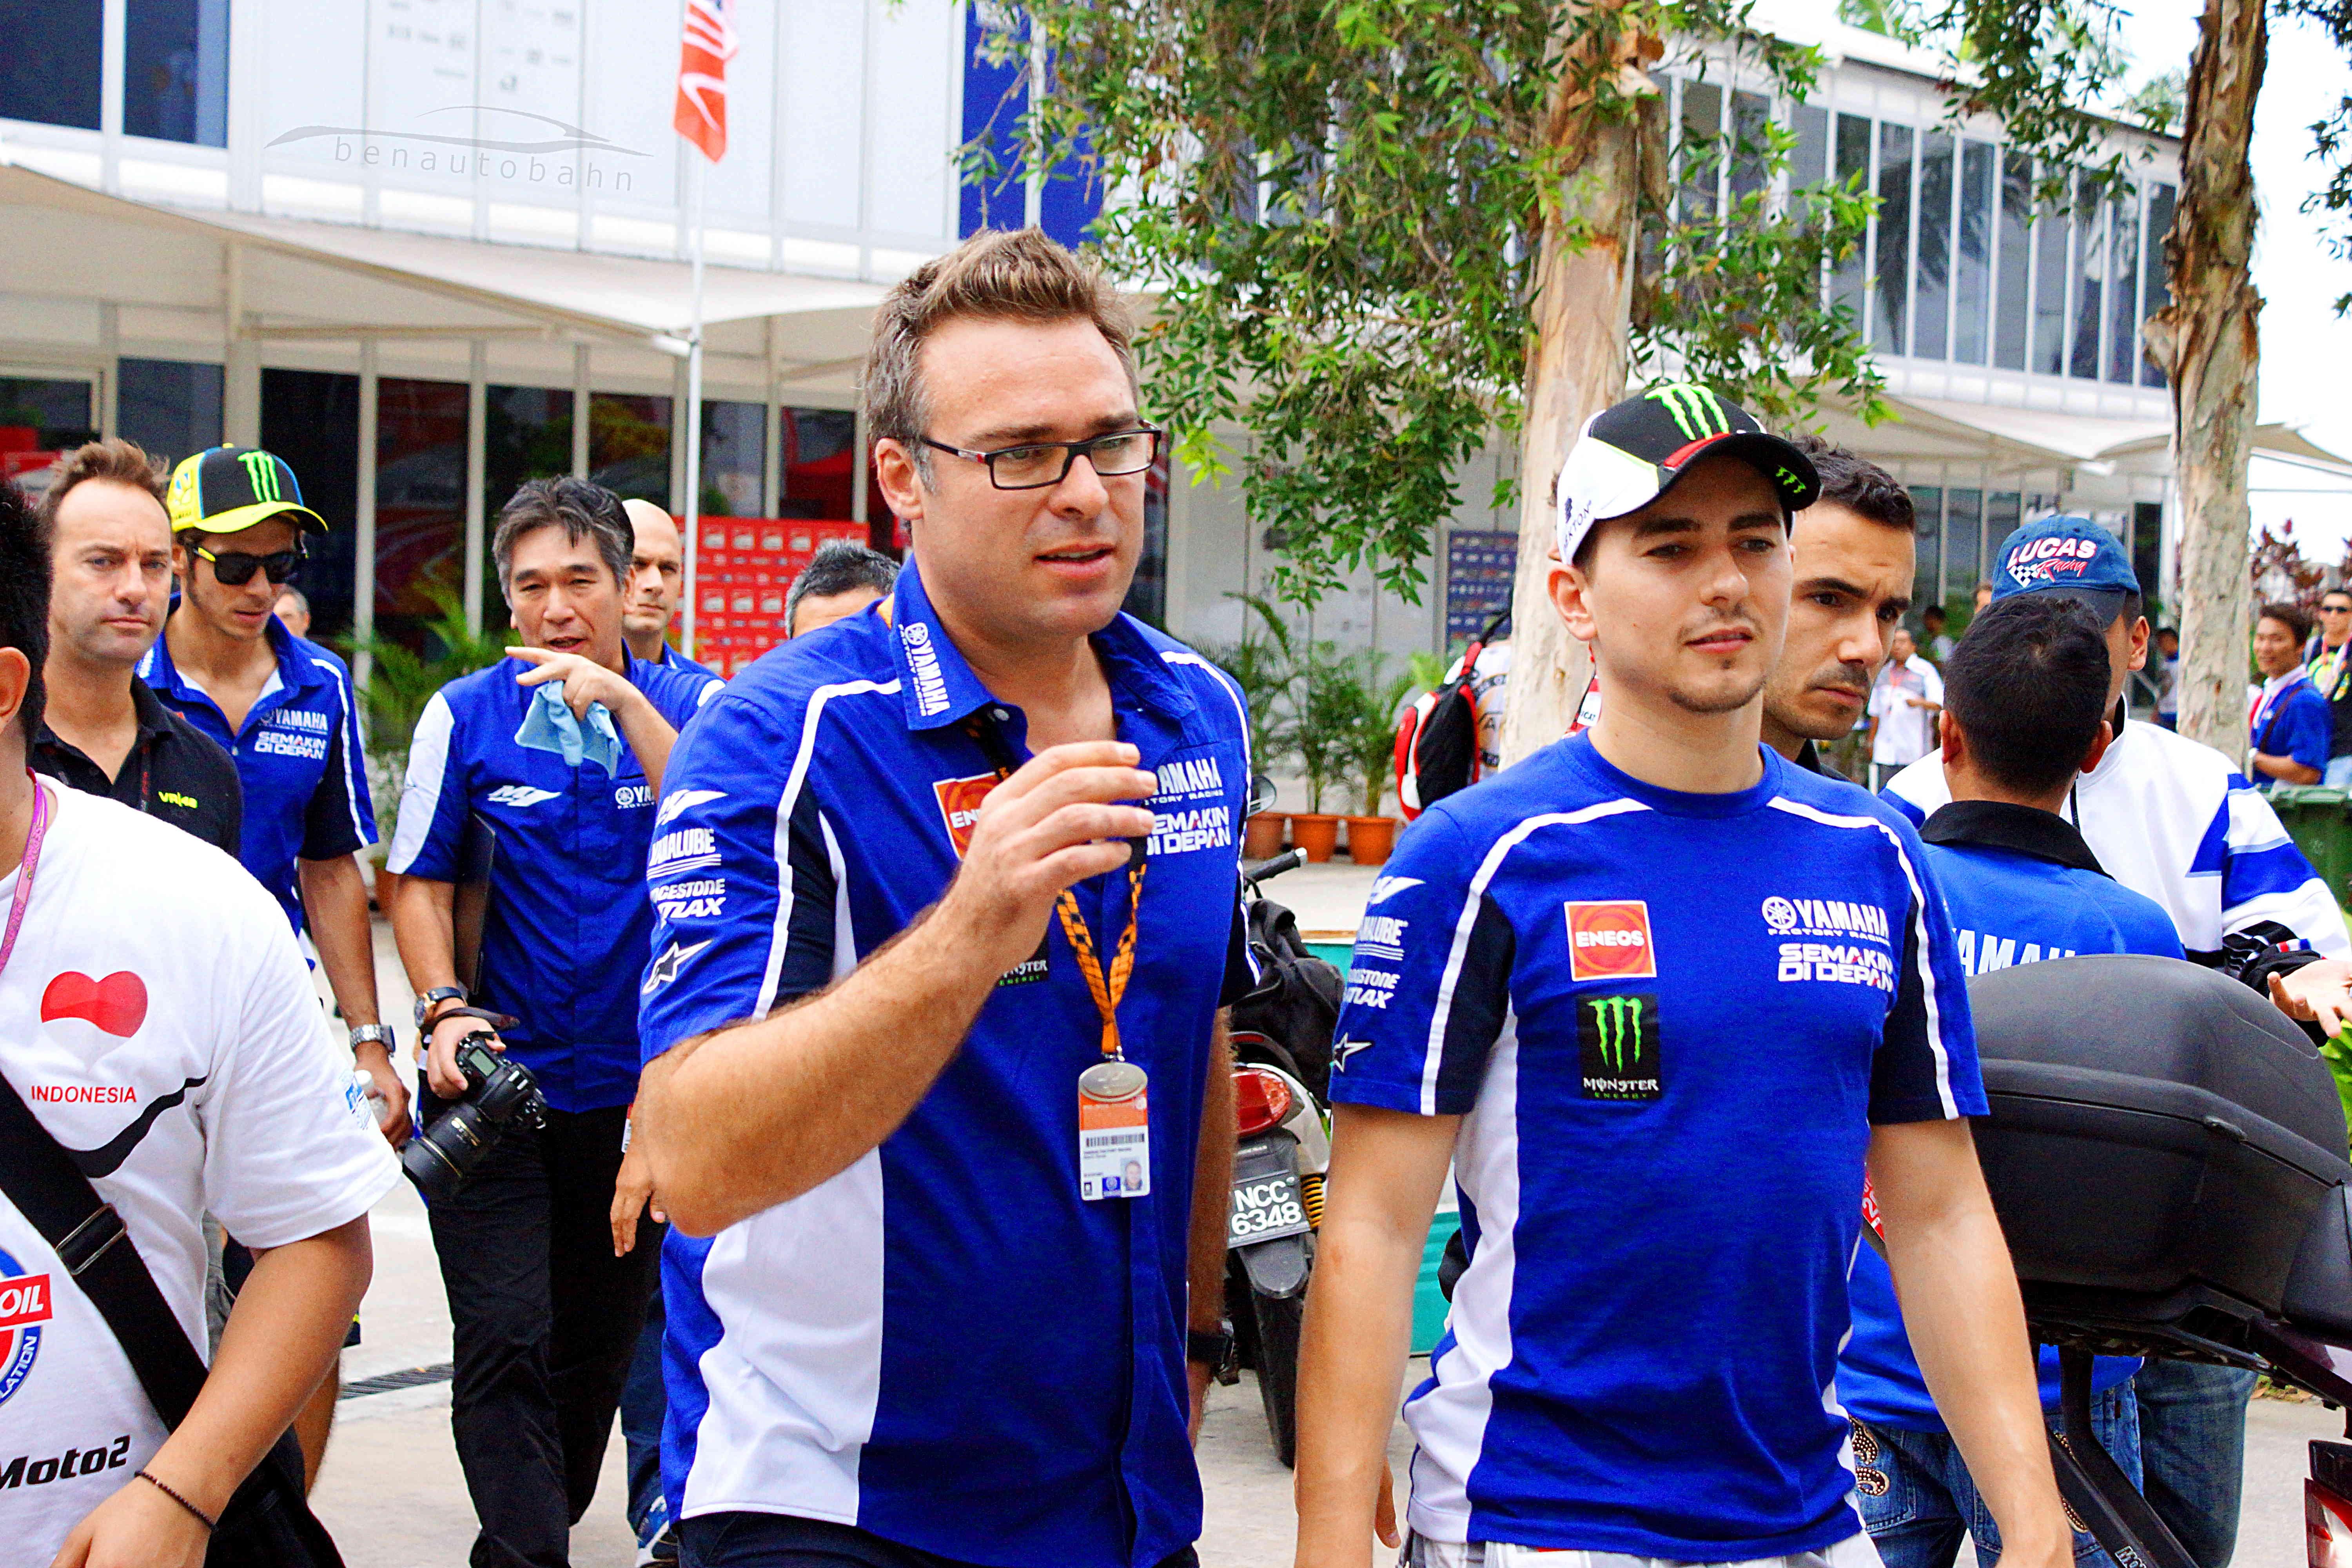 Jorge Lorenzo (right), and Valentino Rossi (rear left, both wearing caps) chatting with their team.